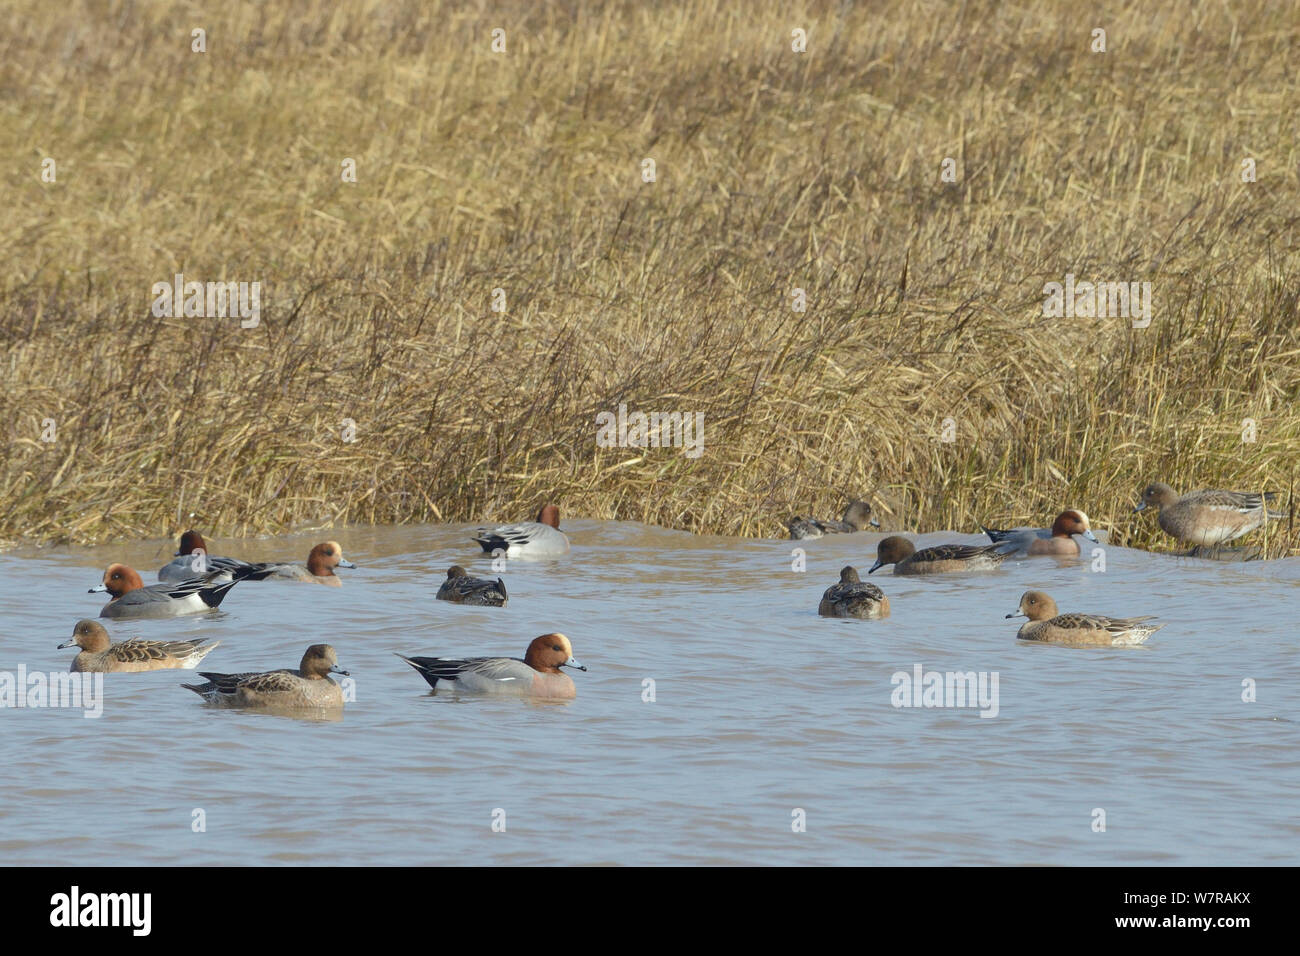 Wigeon (Anas penelope) swimming in a tidal creek as a high tide rises to cover Spartina / Cord grass (Spartina sp.) growing on the saltmarsh fringing it, Severn Estuary, Somerset, UK, March. Stock Photo